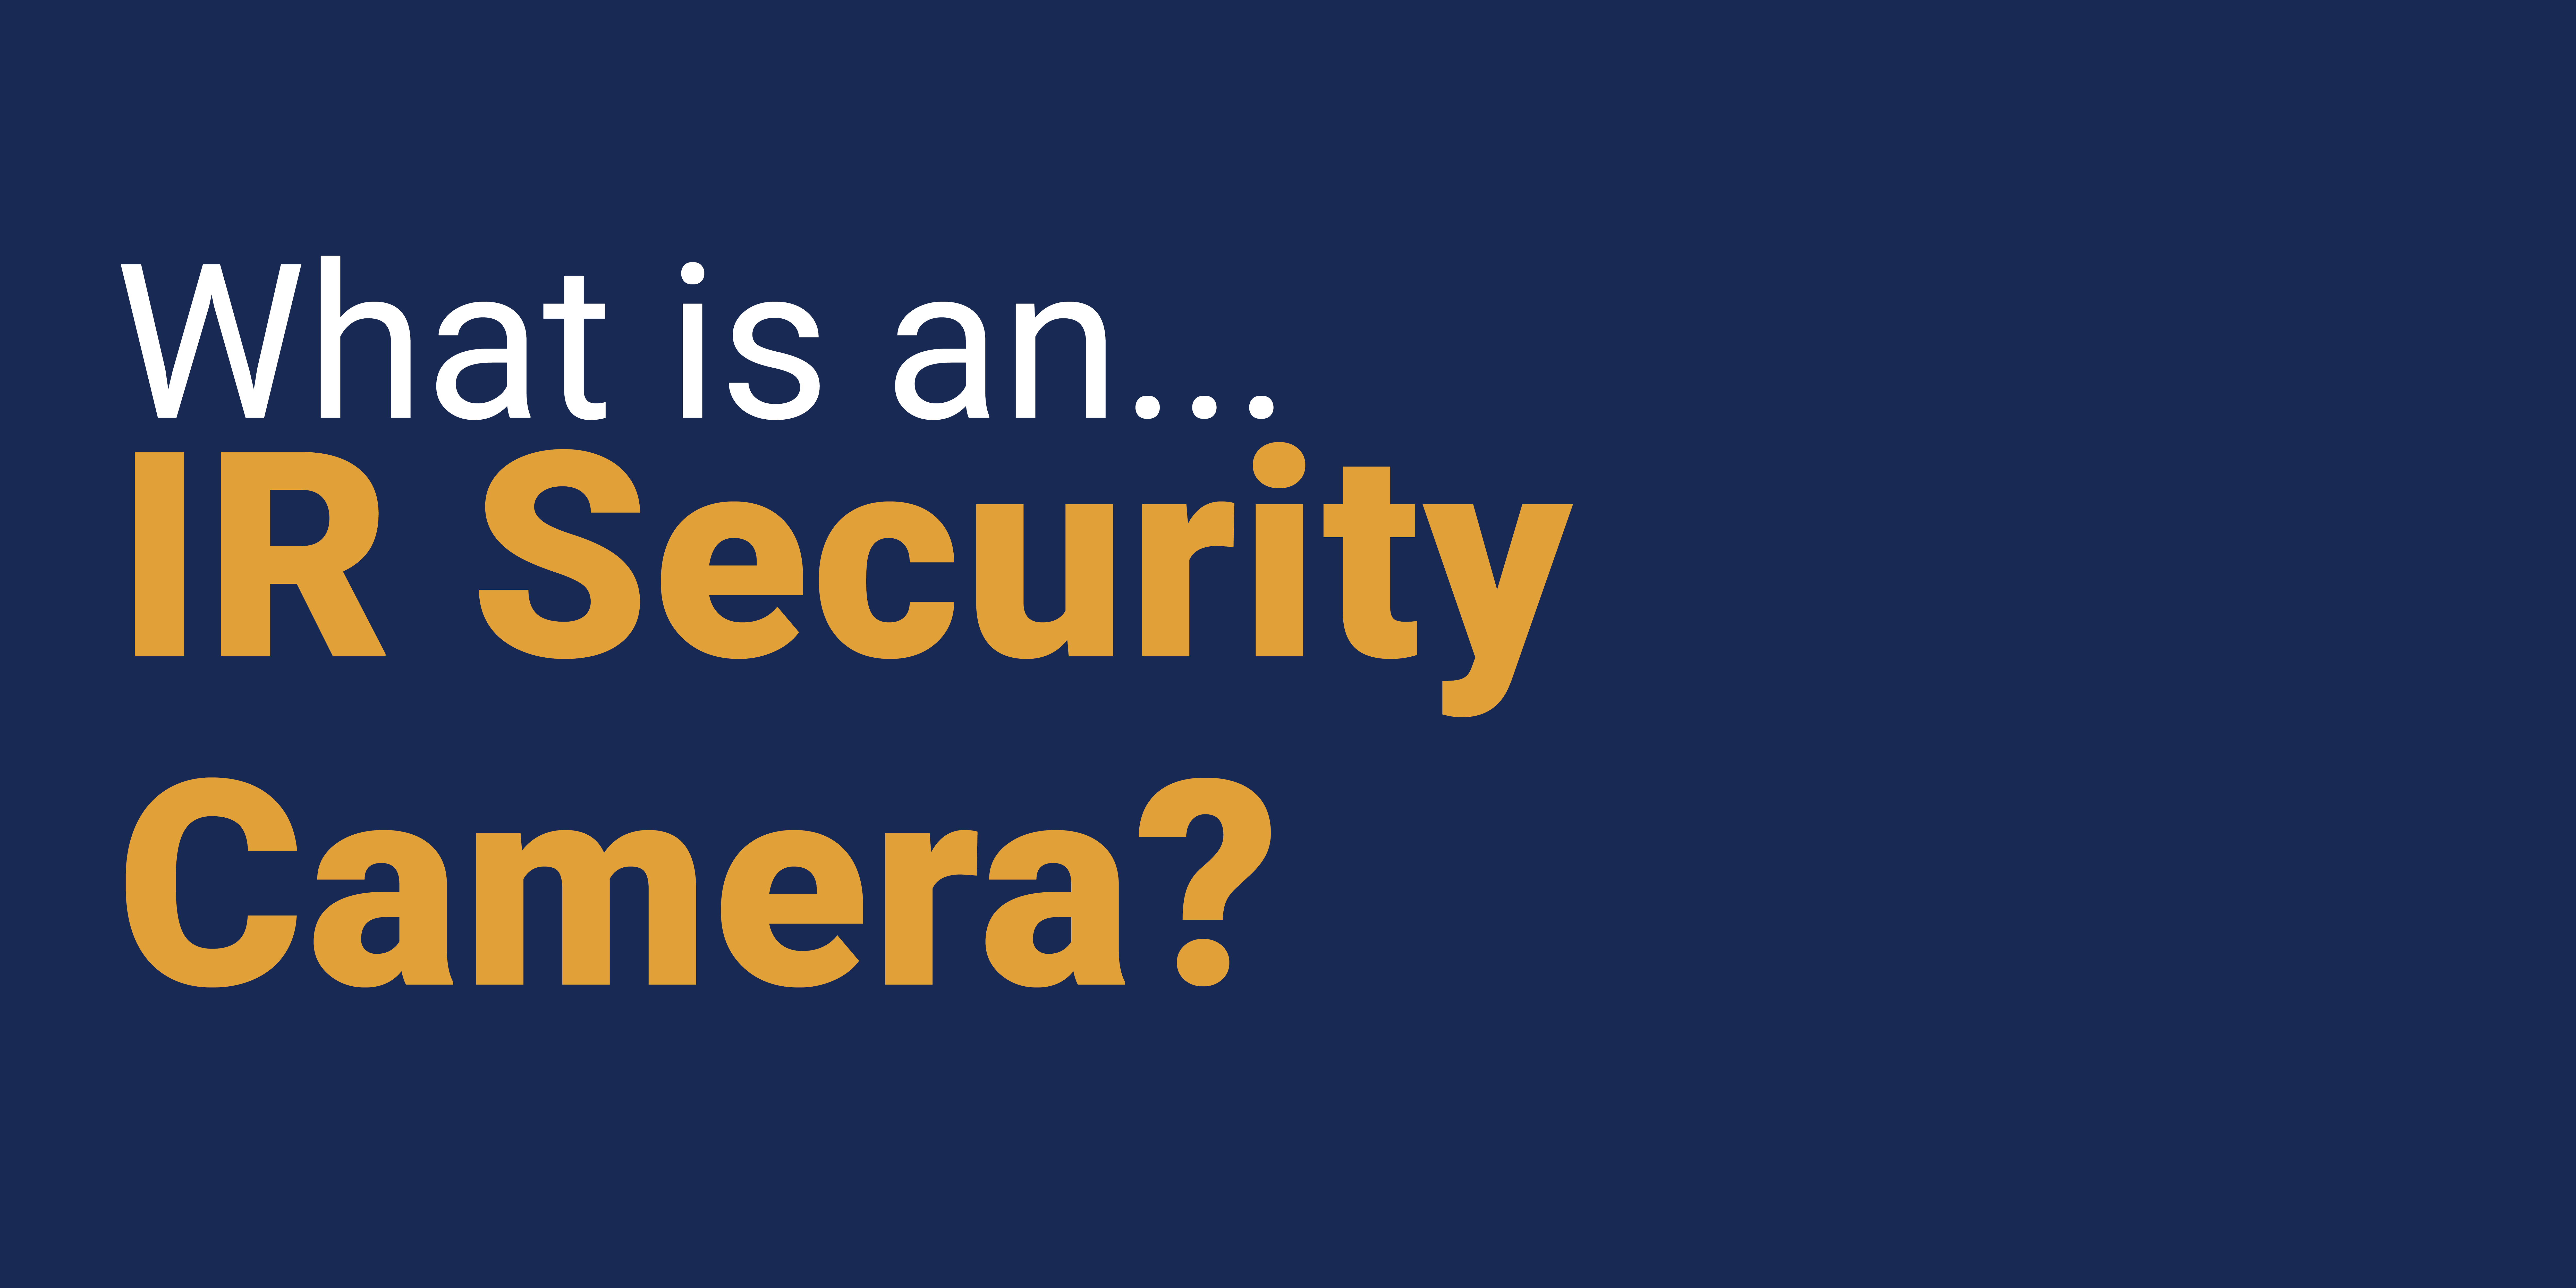 What is an IR Security Camera?